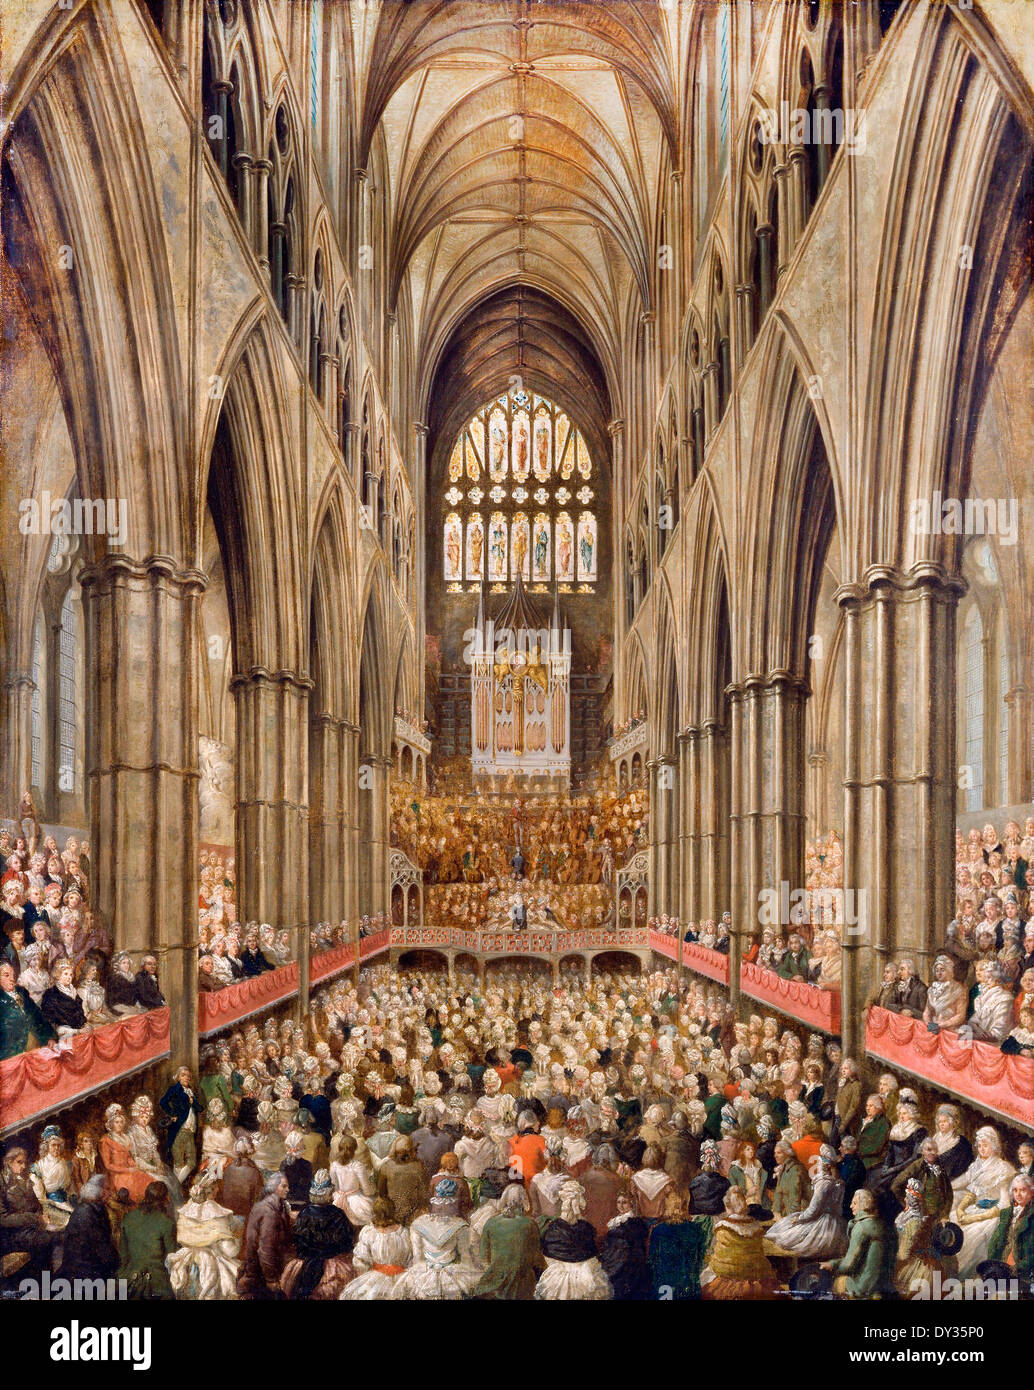 Edward Edwards, Interior View of Westminster Abbey on the Commemoration of Handel, Taken from the Manager's Box. Circa 1790. Stock Photo